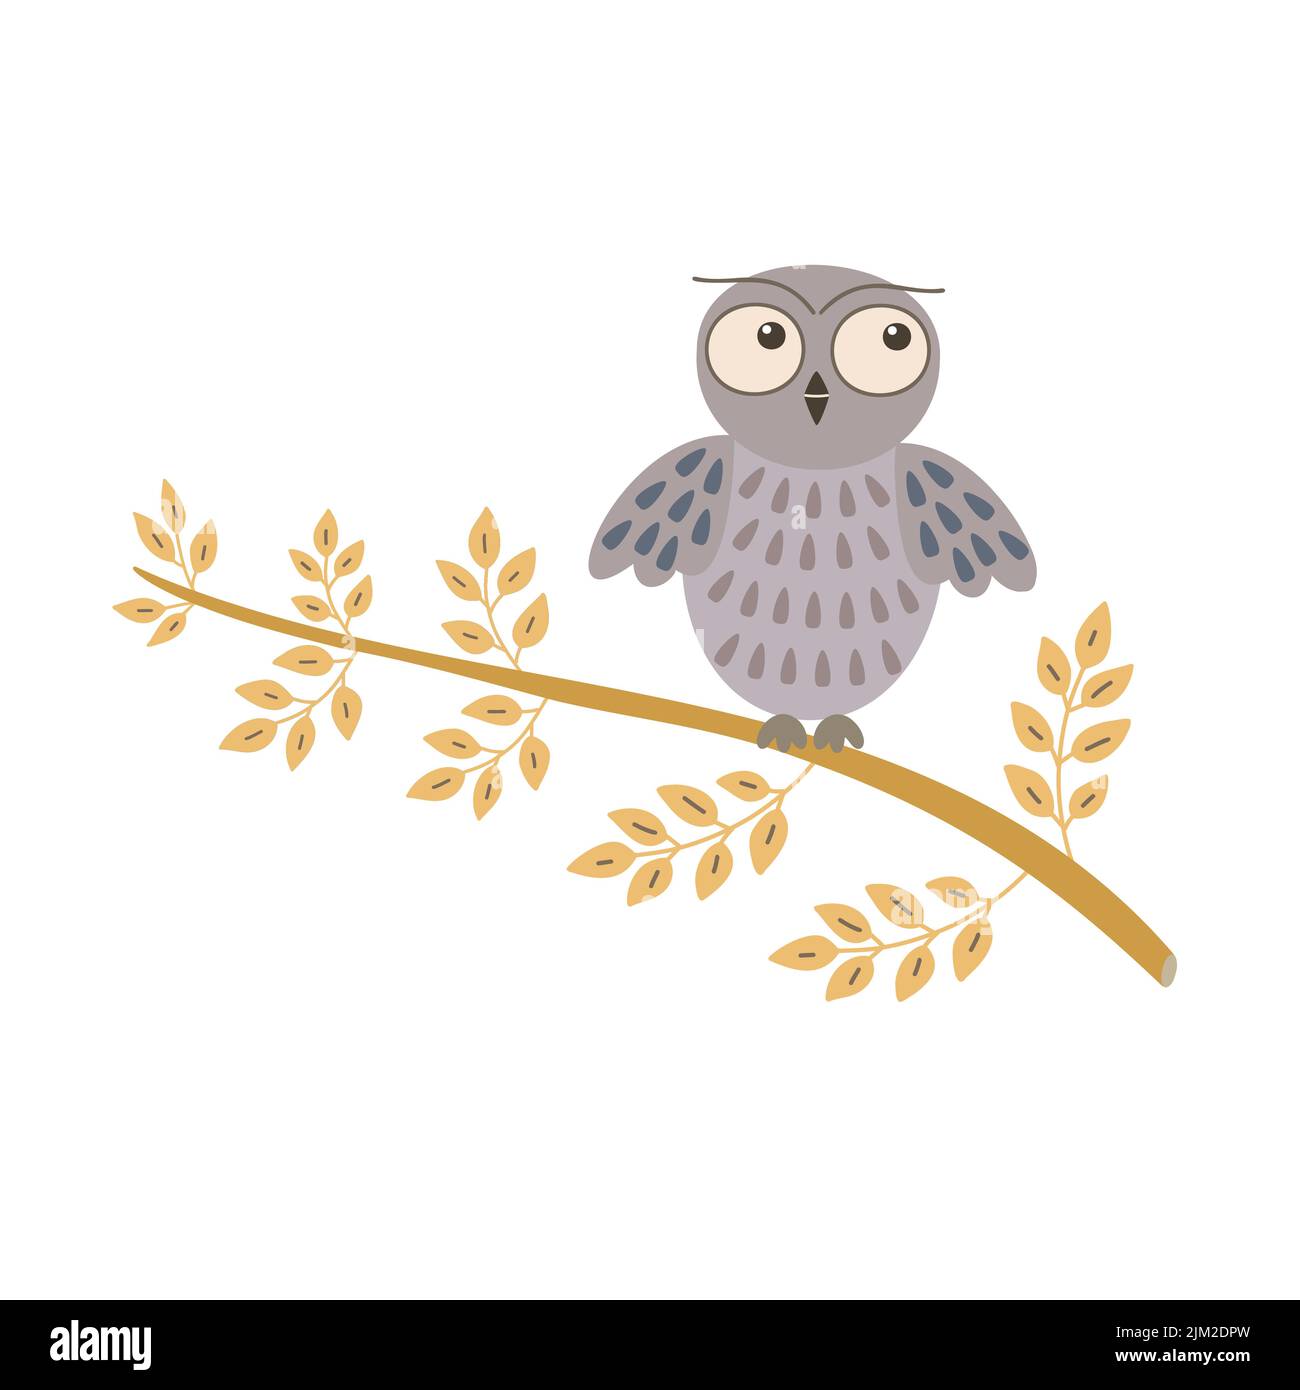 Wise expert owl black simple silhouette vector icon